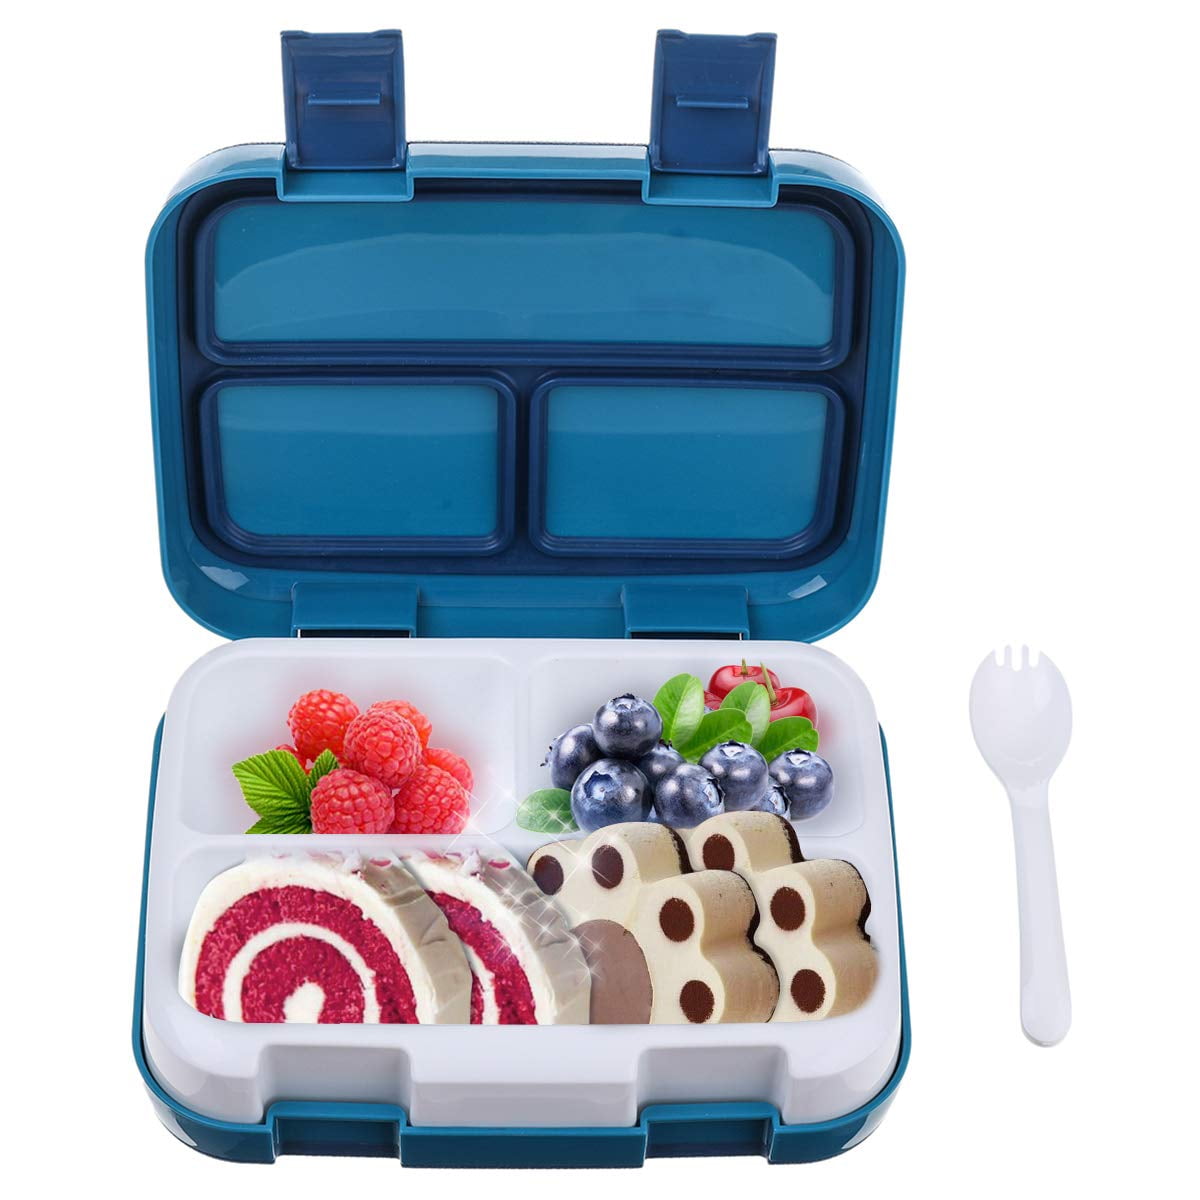 Details about   Microwave Plastic Lunch Box Kids Food Storage Container Leak-Proof Portable Bag 